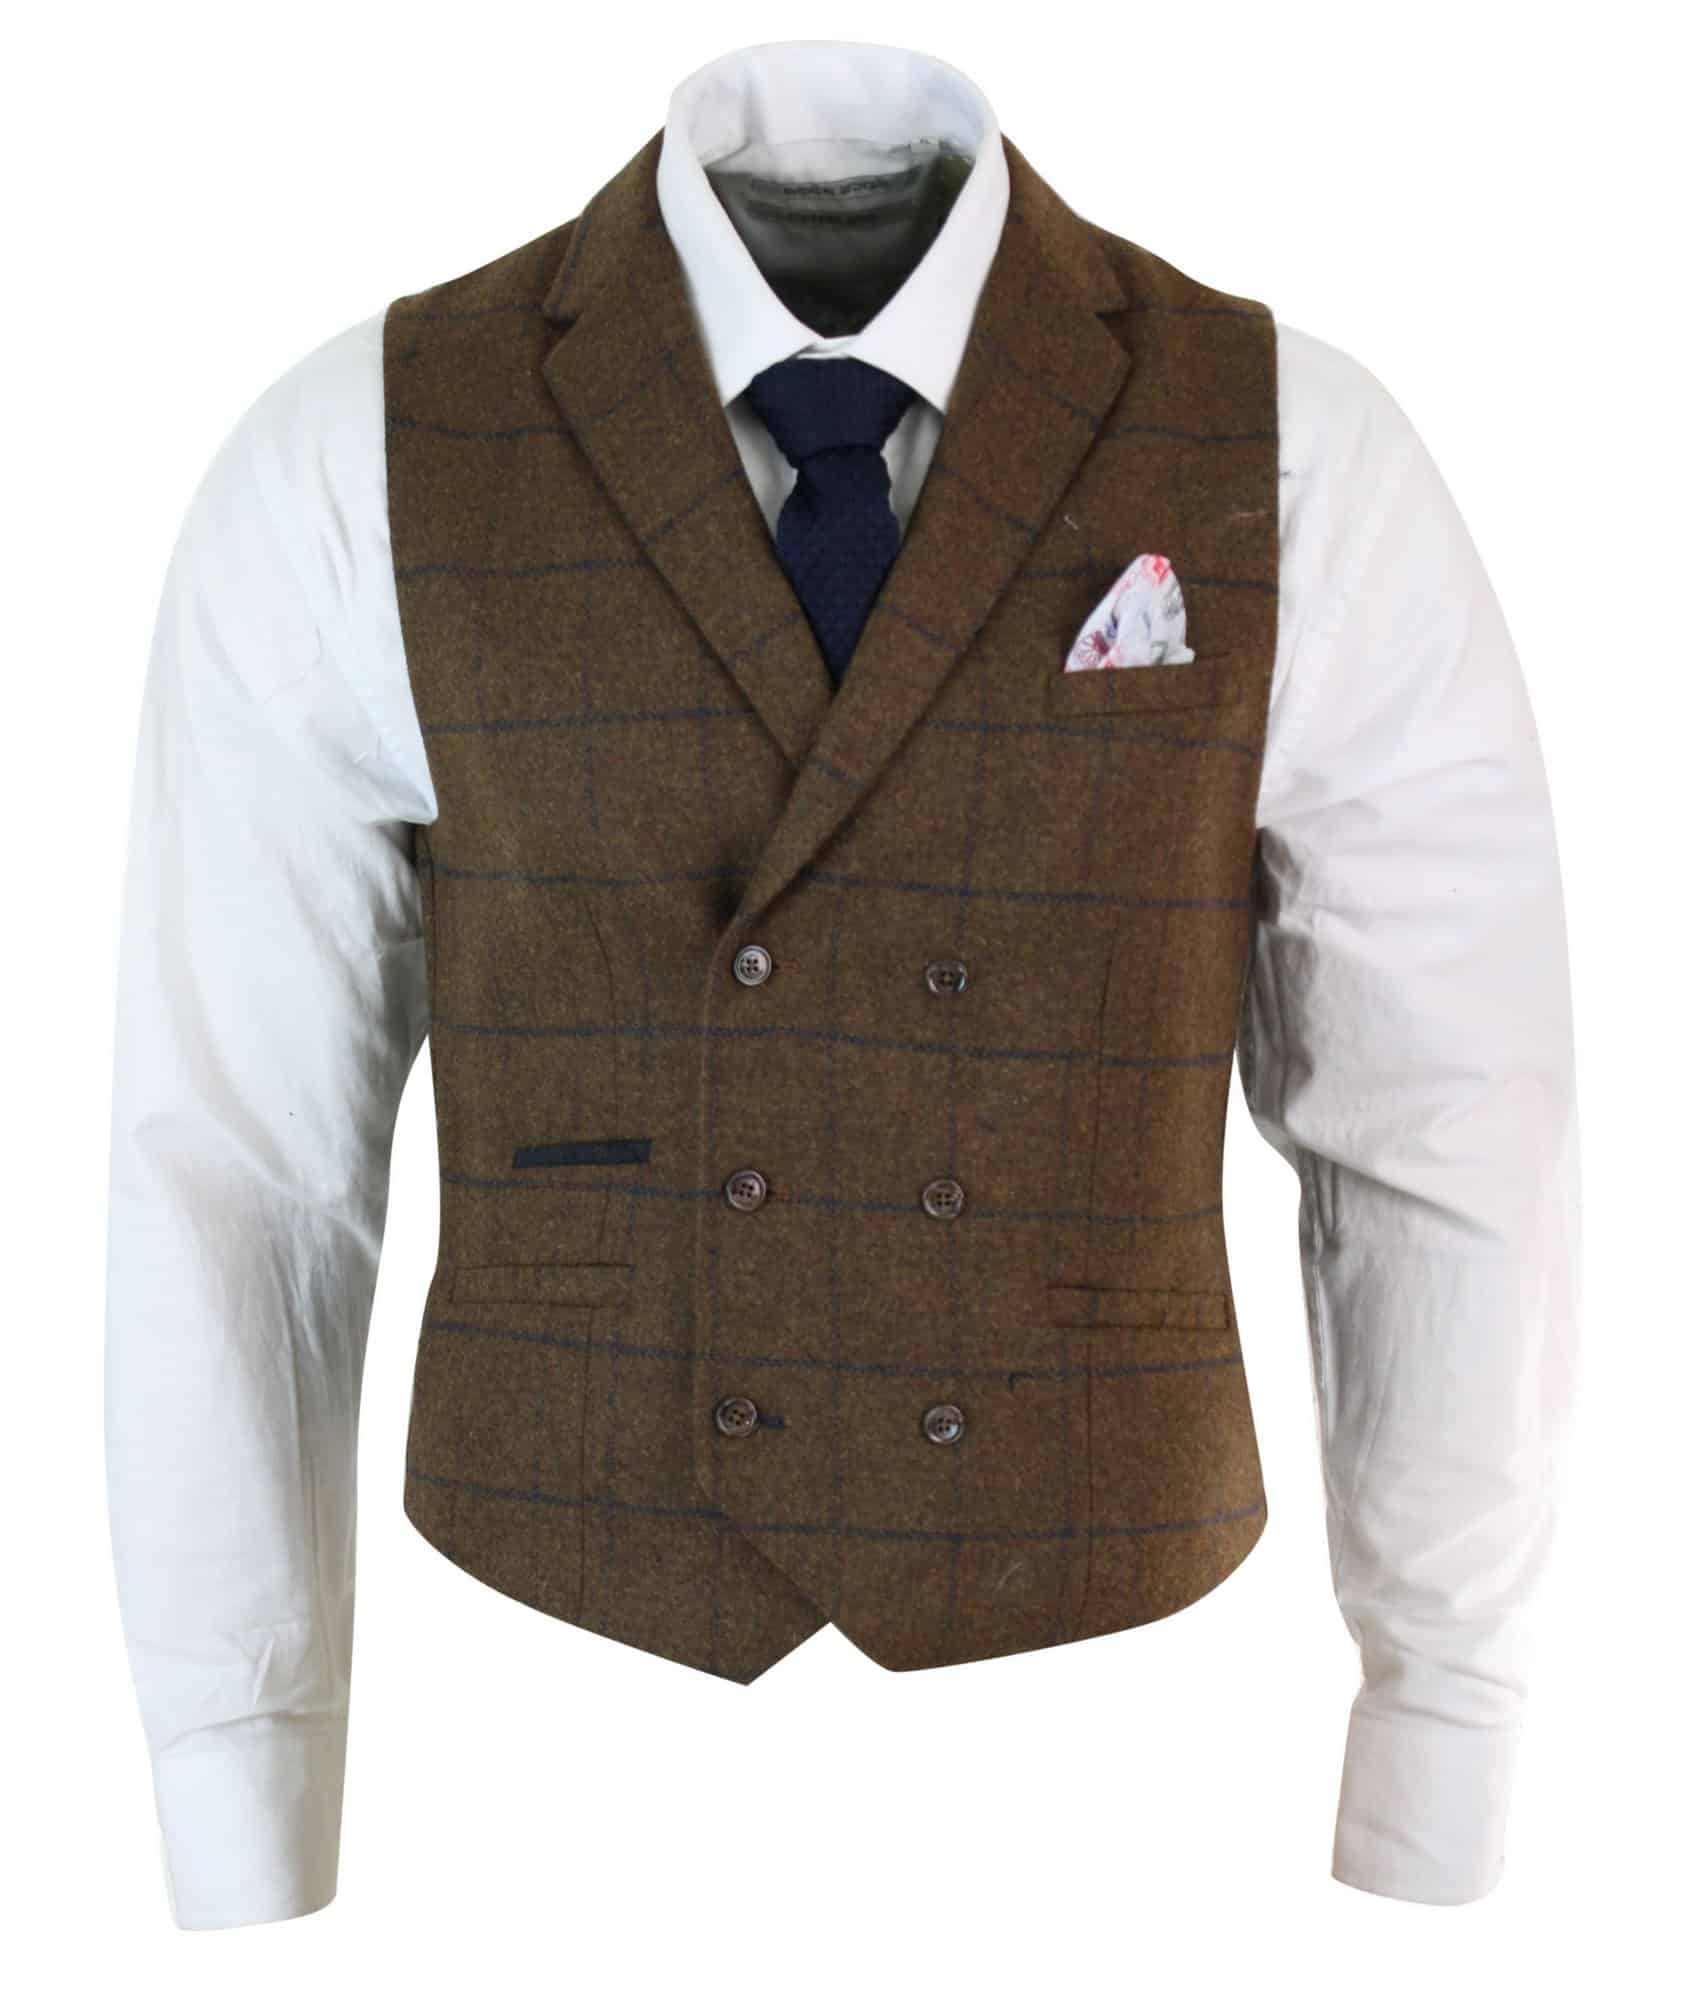 Martin Mens Grey Herringbone Waistcoat Double Breasted Collars Tailored Fit 1920s Retro Vintage Styled Vest 